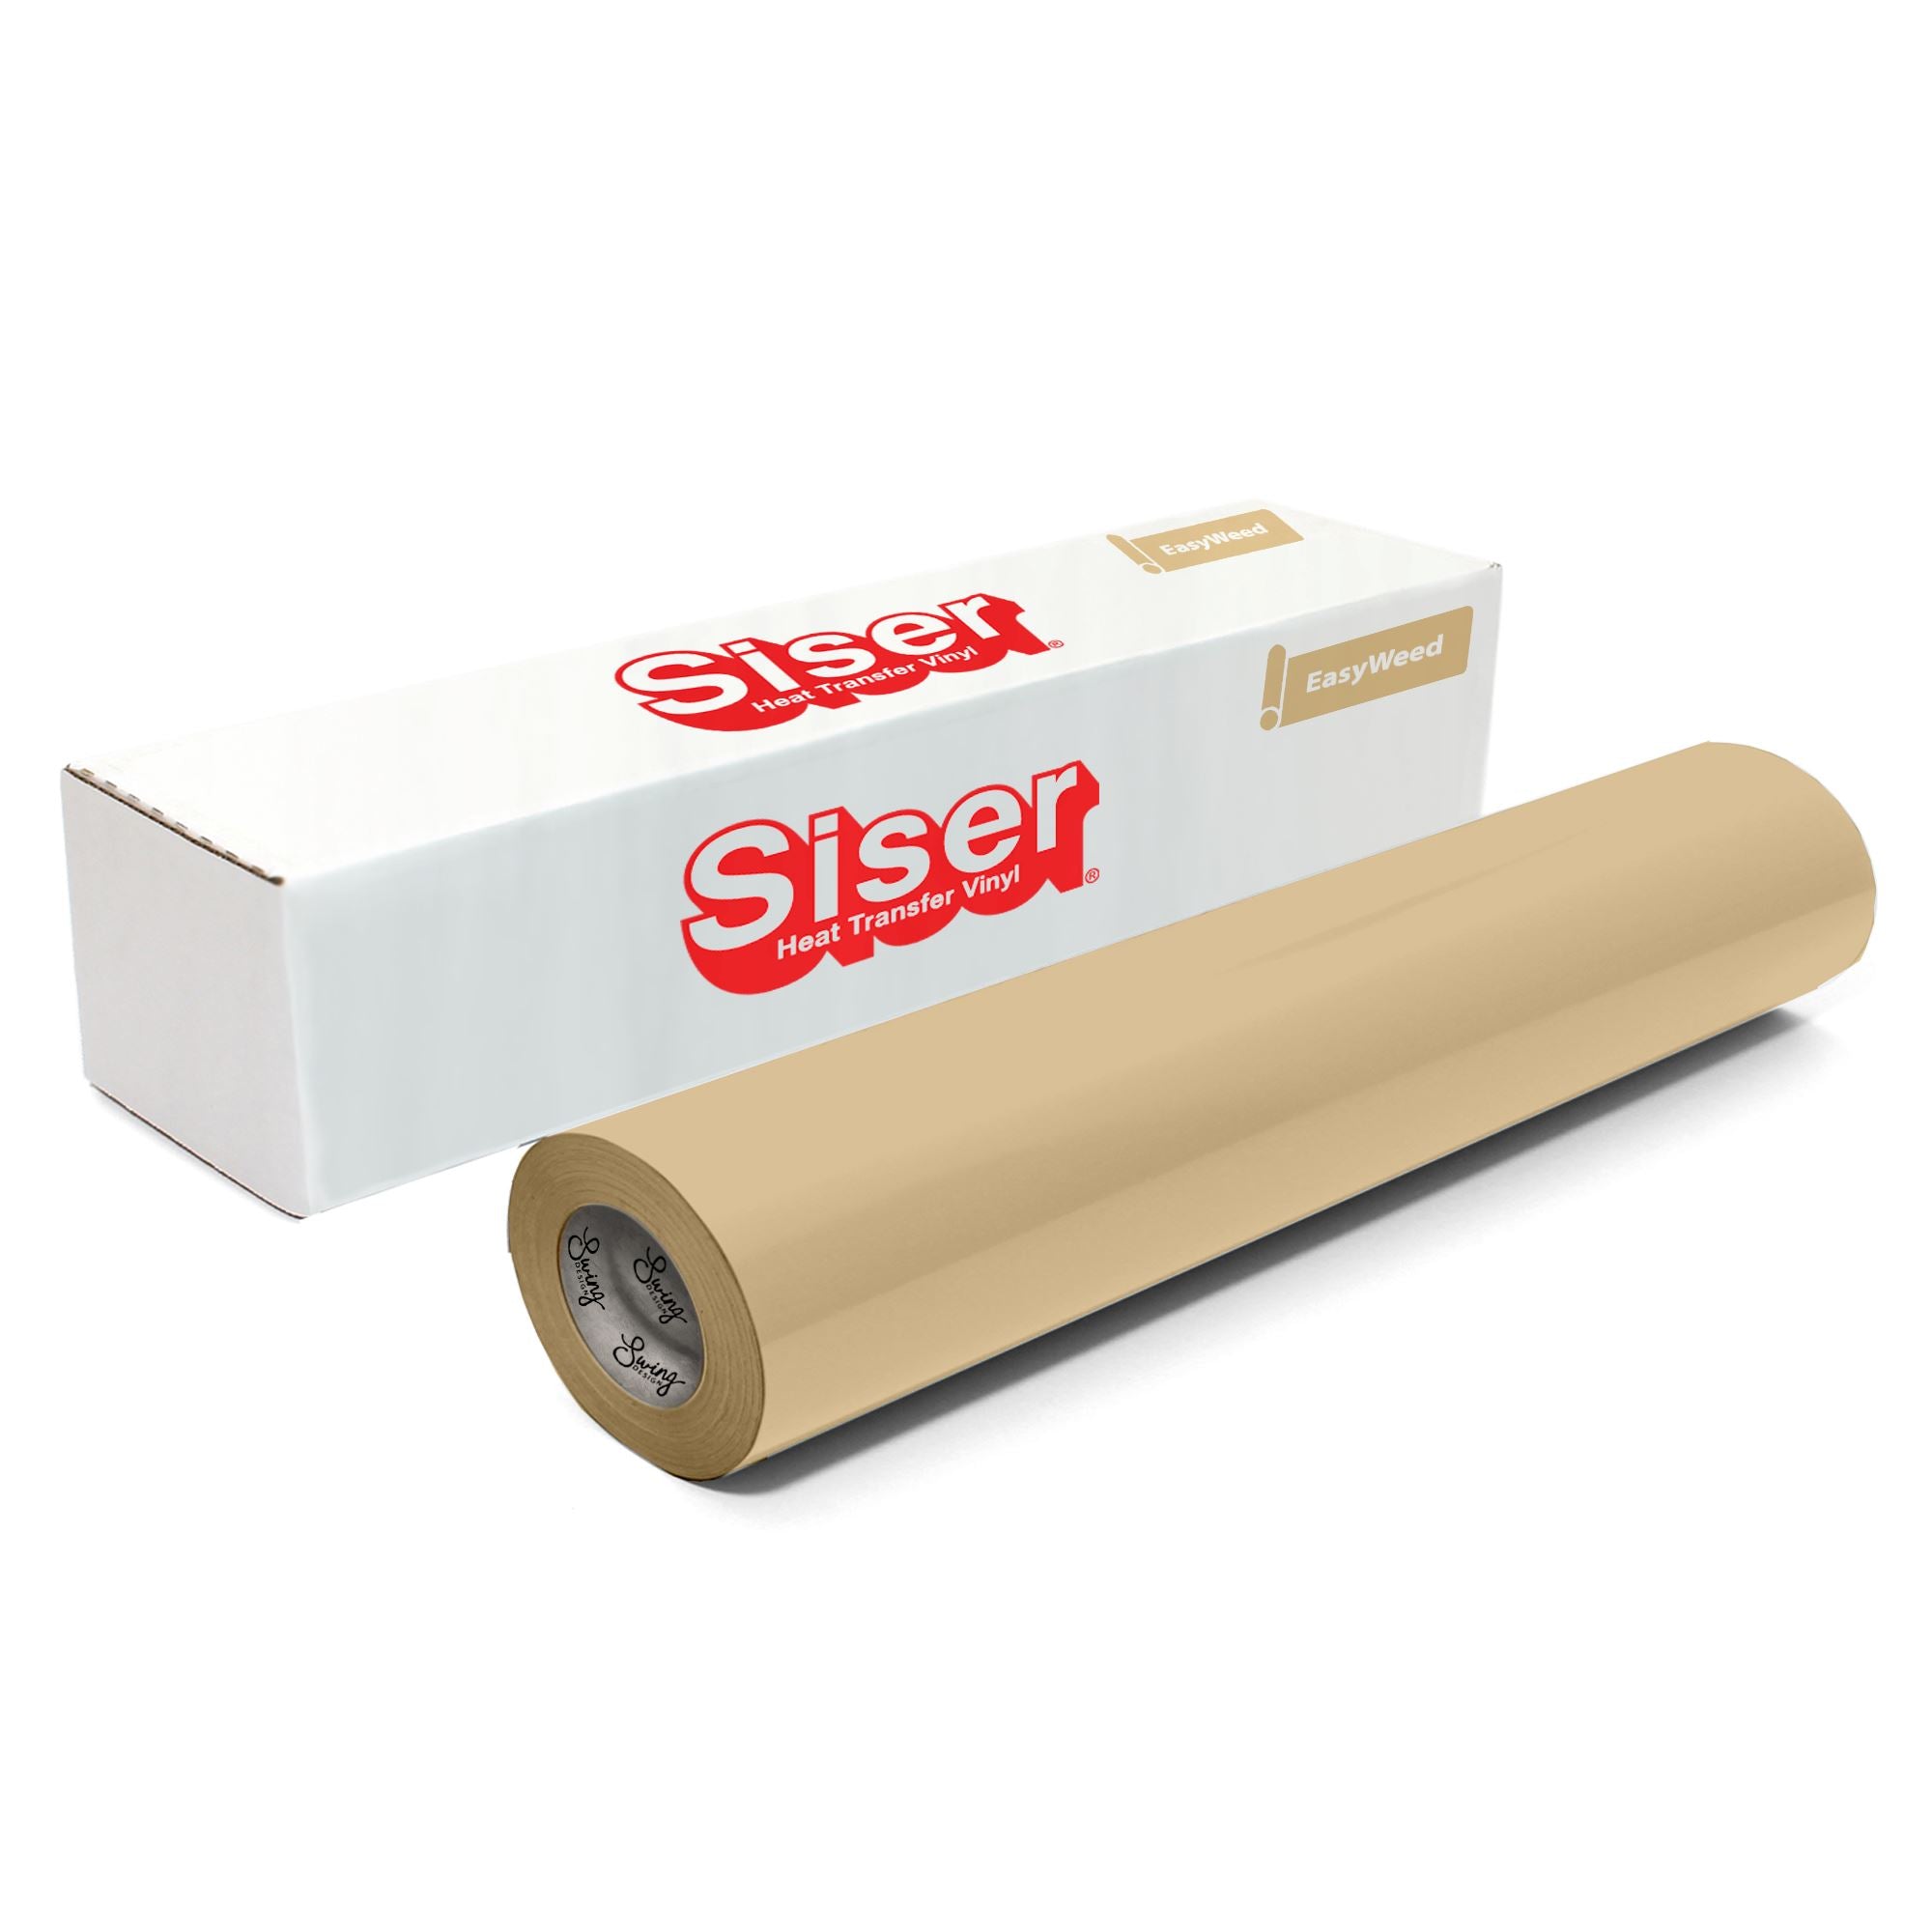 Siser EasyWeed Heat Transfer Vinyl 11.8 x 15ft Roll (Gold) - Compatible  with Siser Romeo/Juliet & Other Professional or Craft Cutters - Layerable 